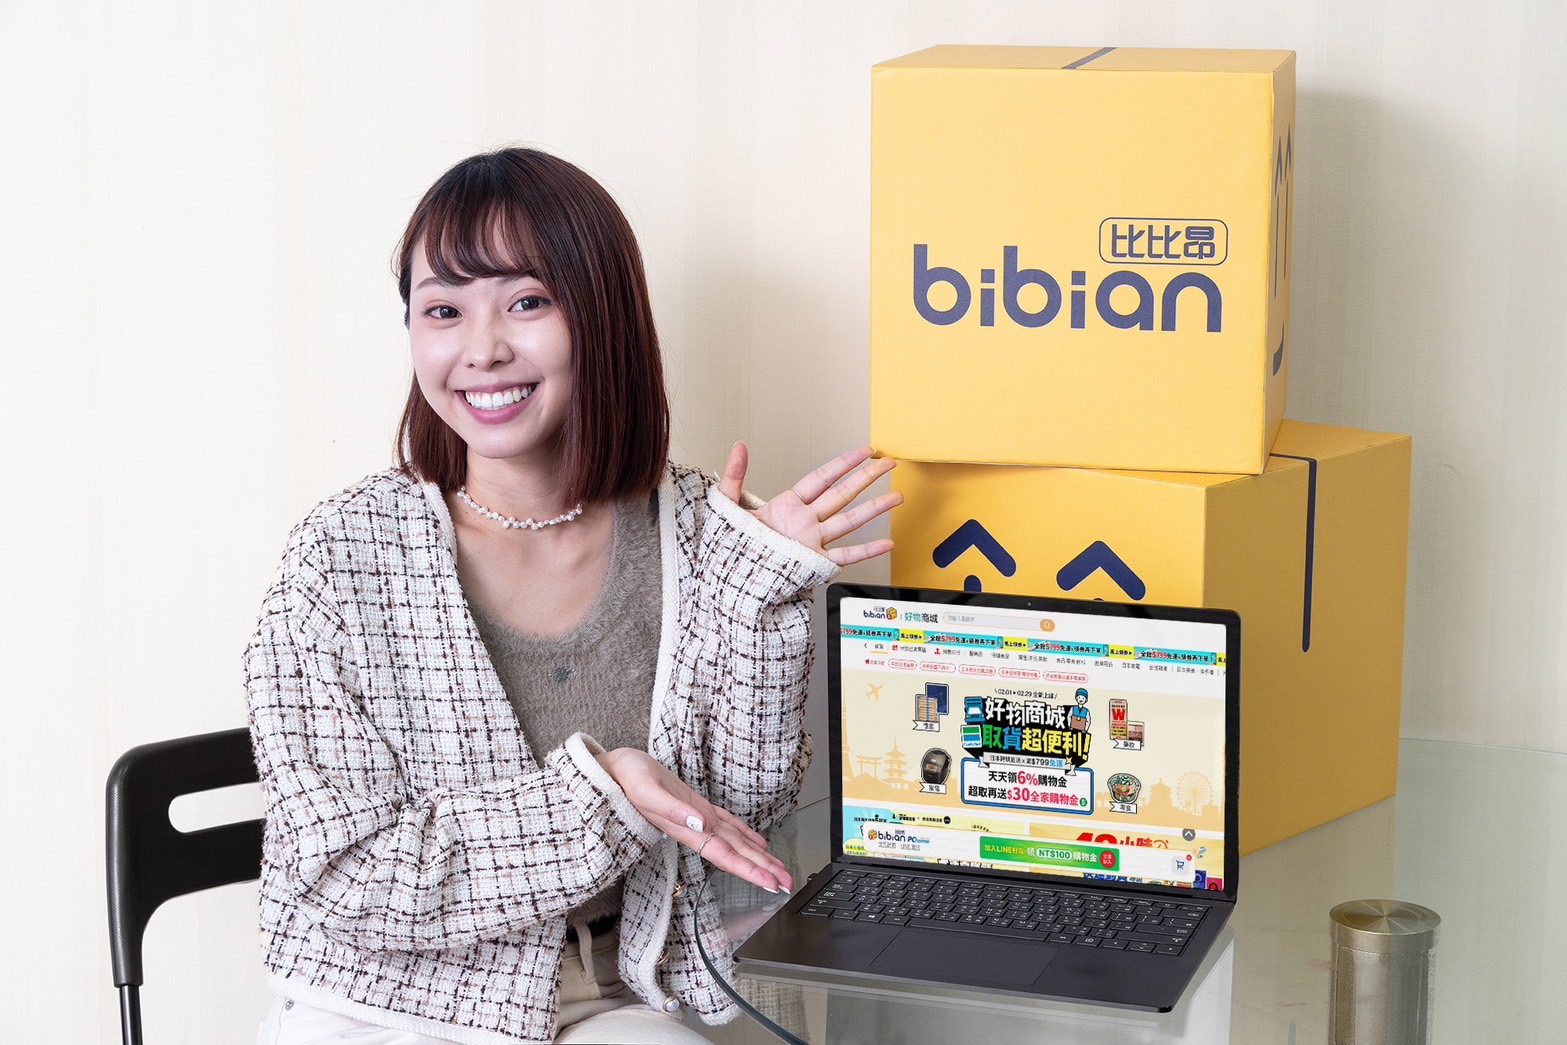 Bibian, PChome's Cross-Border E-commerce Platform Launches the Valentine's Day Sales with Discounts of Up to 46% on Beauty Appliances, Cosmeceuticals, and Health Supplements; Bibian Select Shop Introduces Pickup Services at Family Mart in February